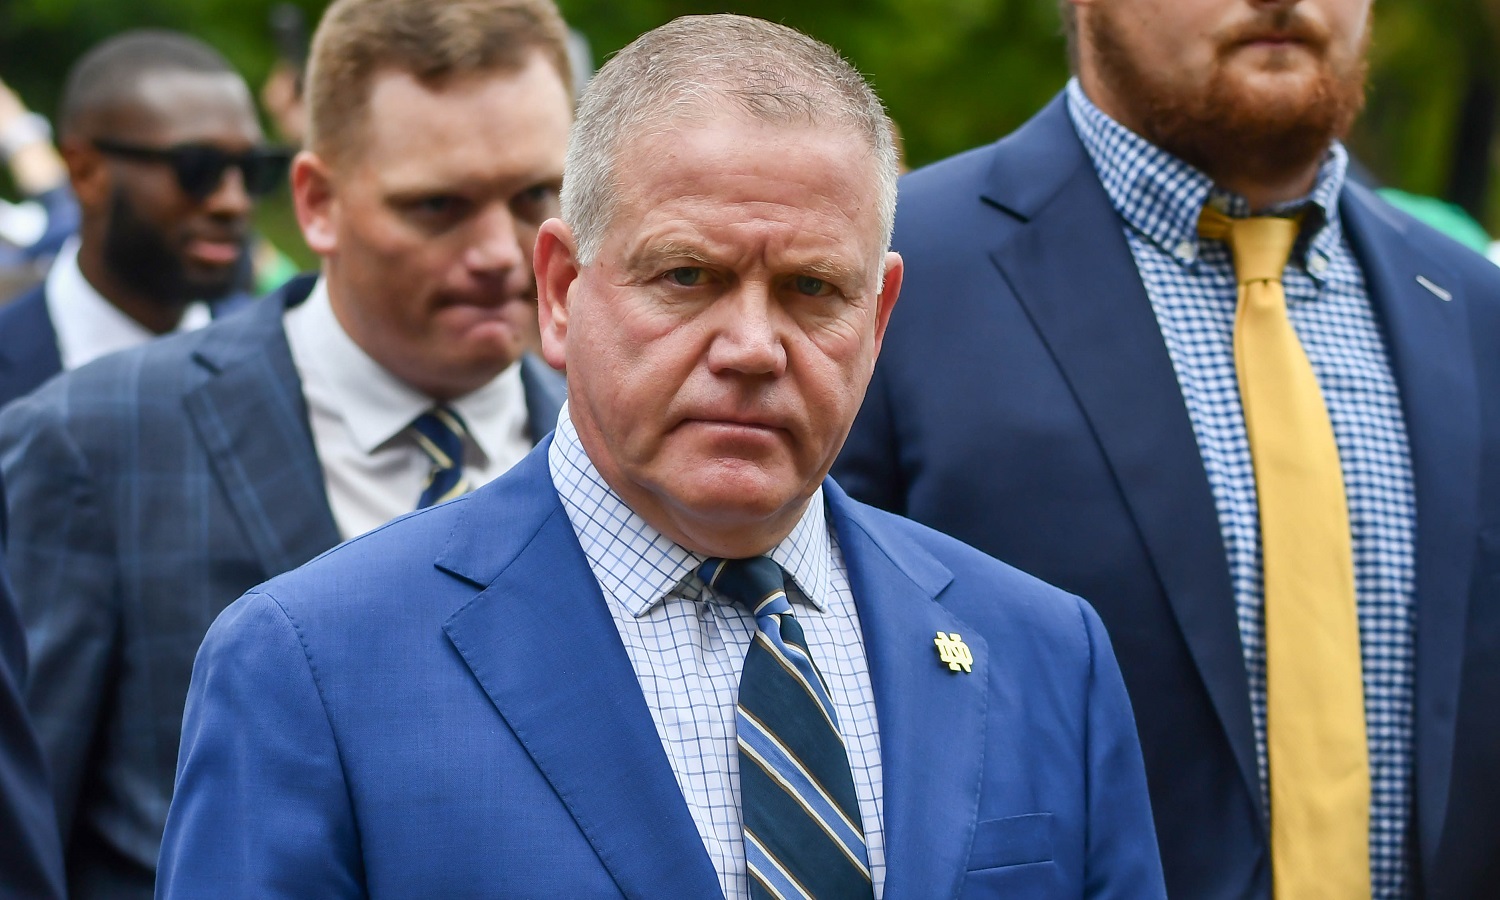 Brian Kelly reportedly has ghosted Notre Dame